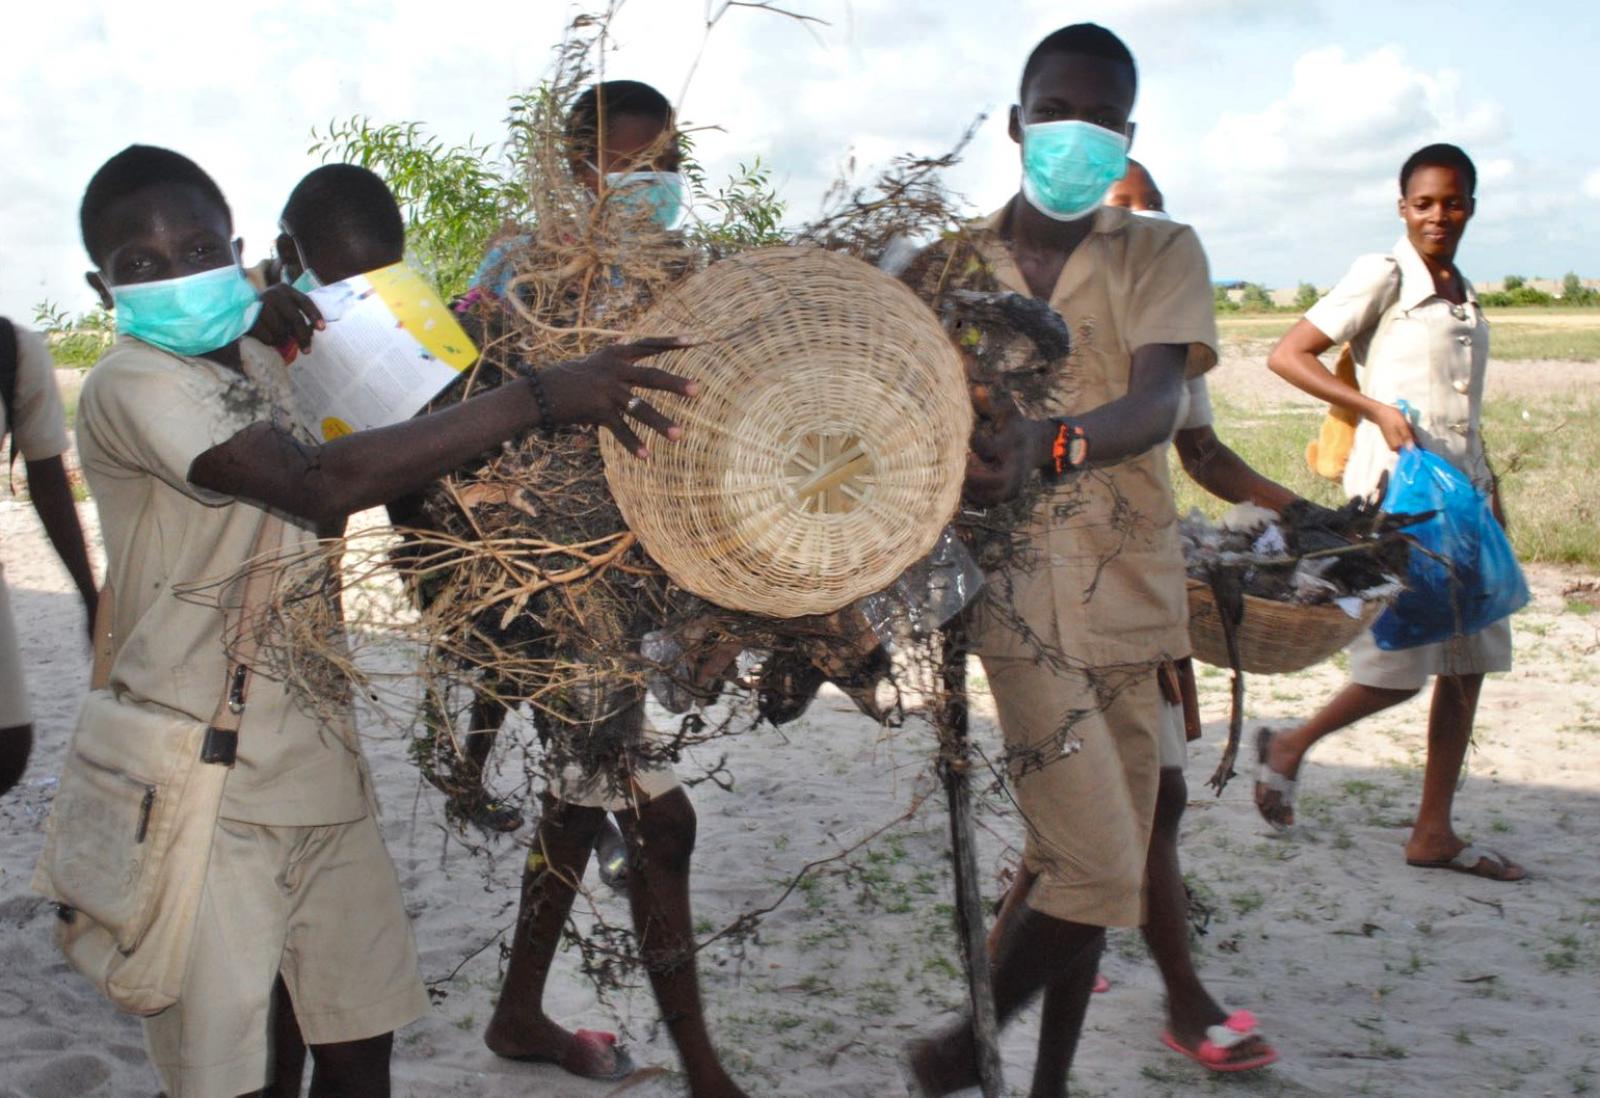 People holding a basket full with litter and twigs